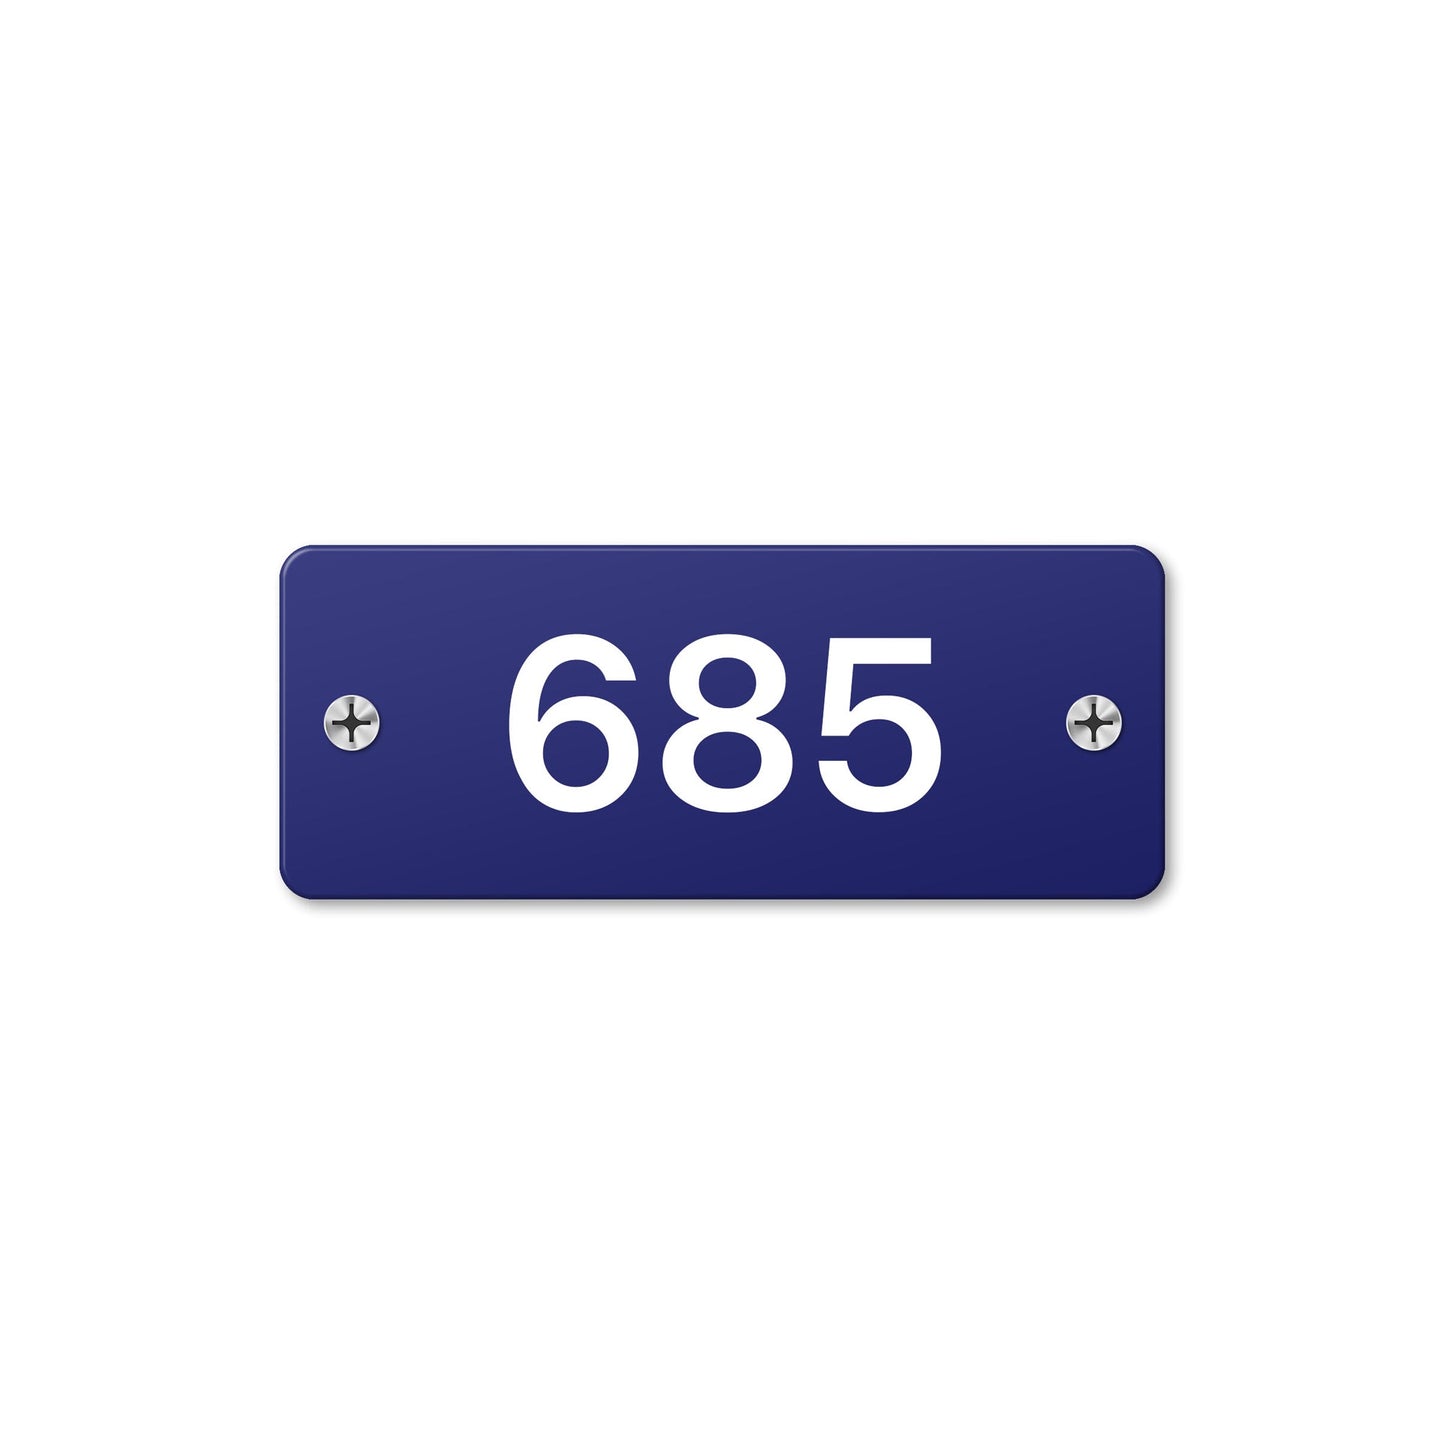 Numeral 685